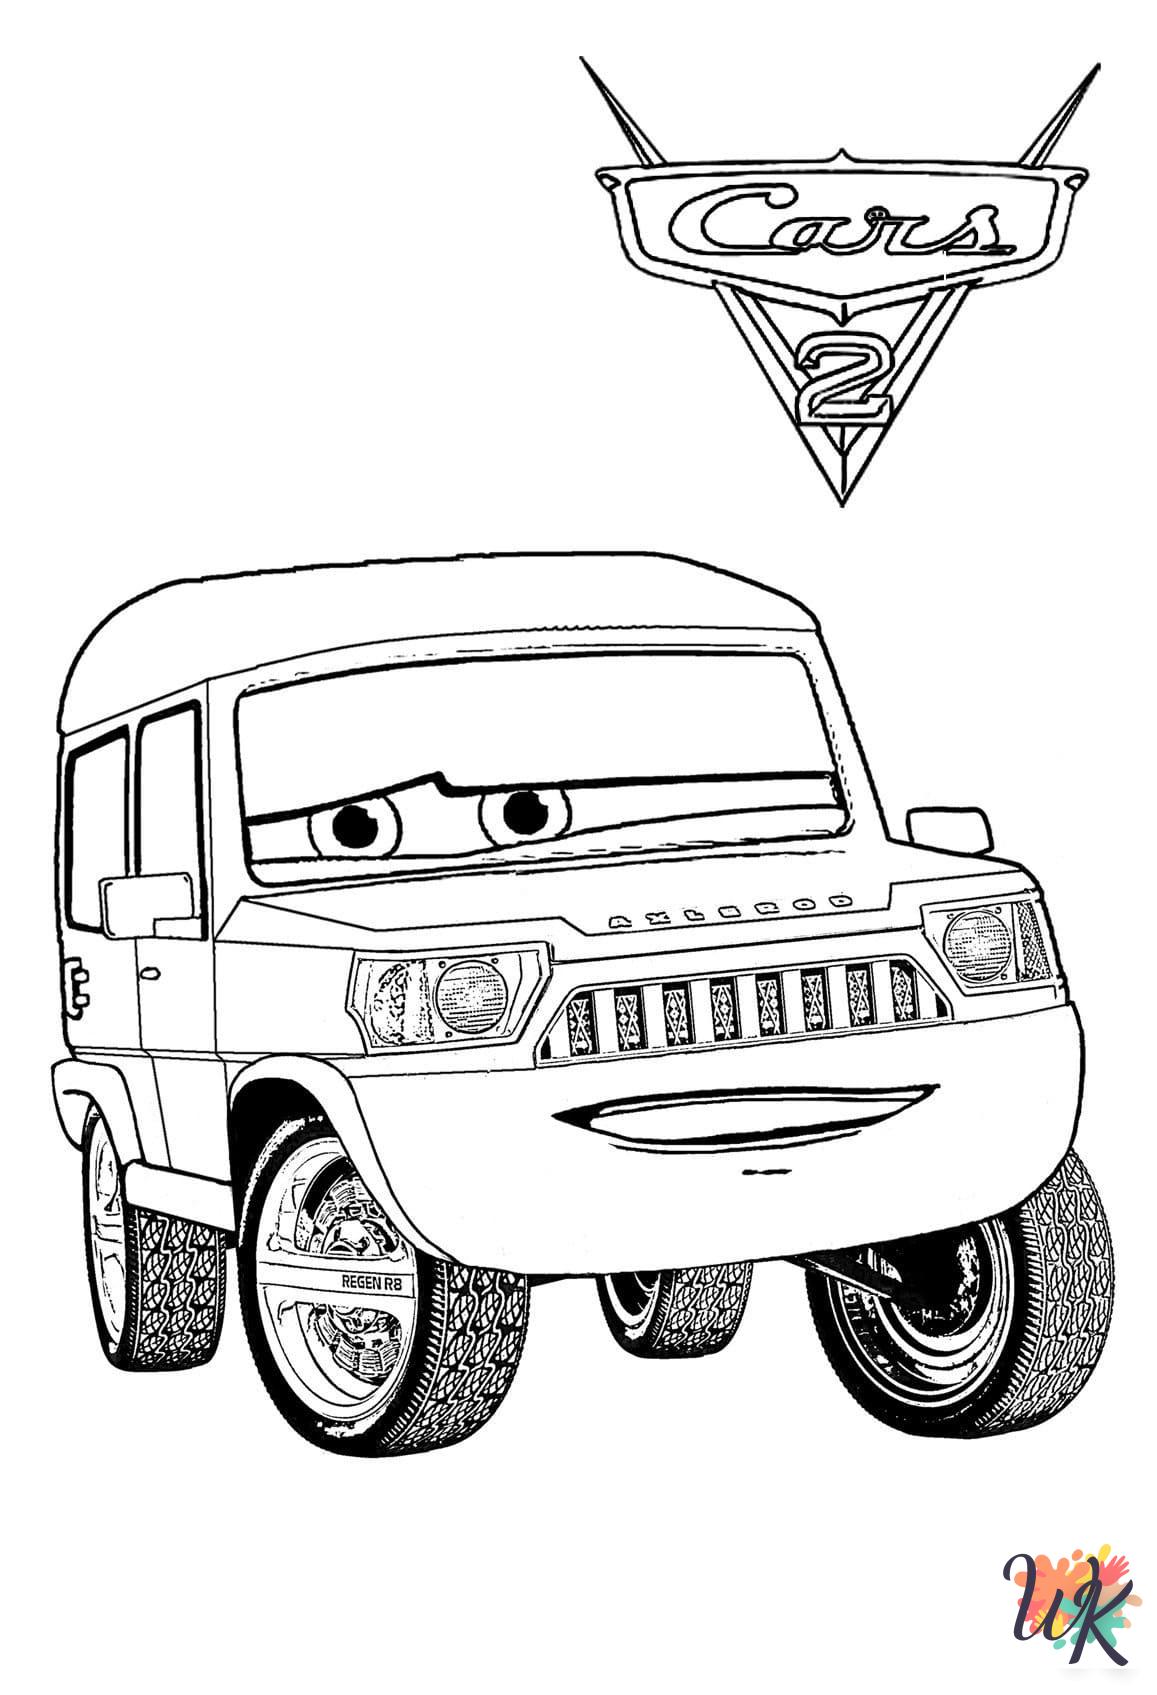 Cars Movie themed coloring pages